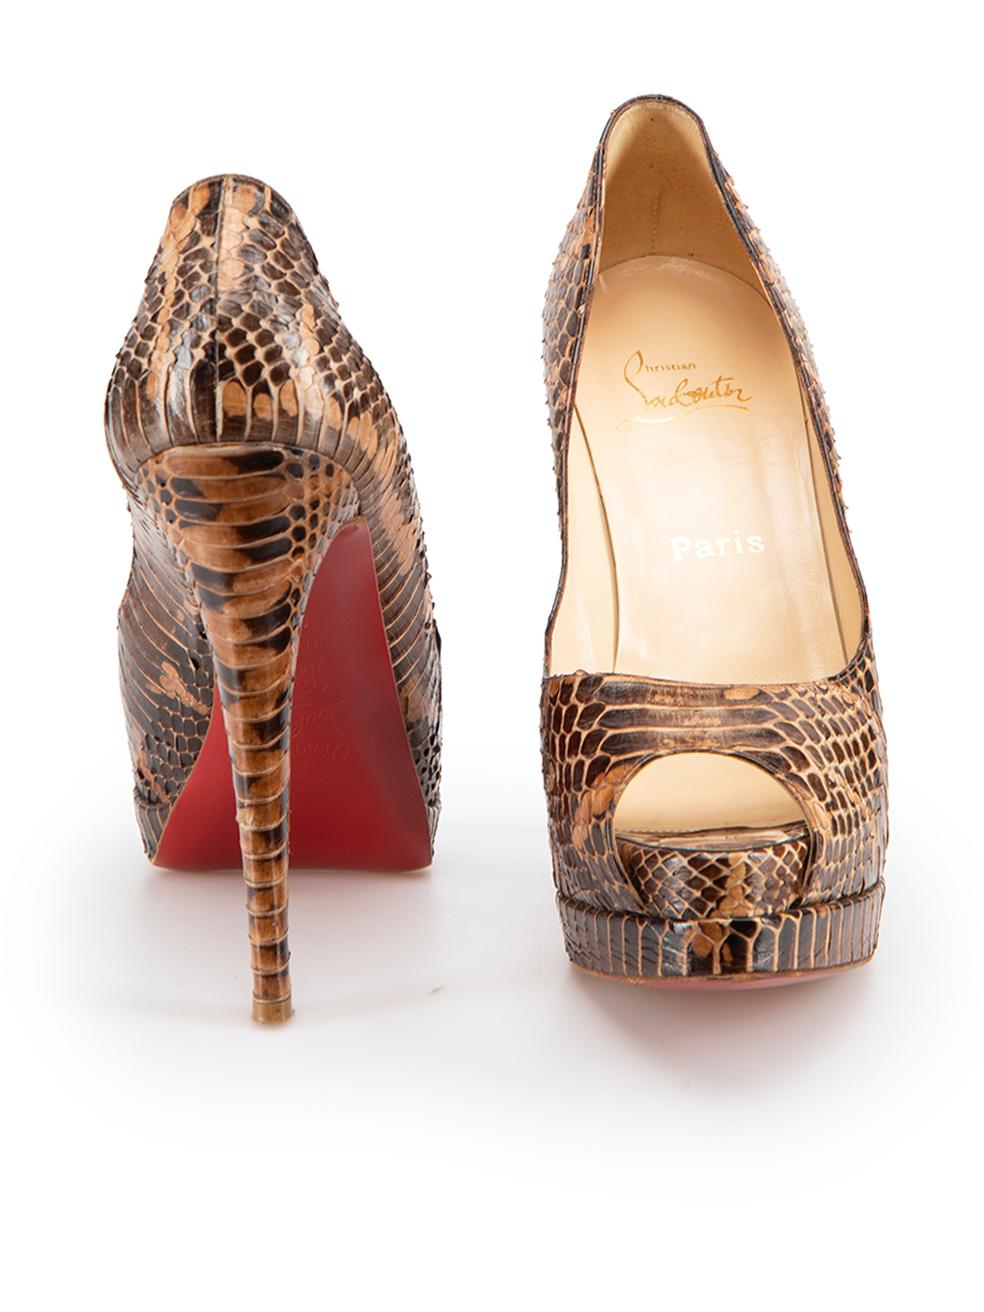 Python Alta Dama Heels Size IT 39.5 In Good Condition For Sale In London, GB